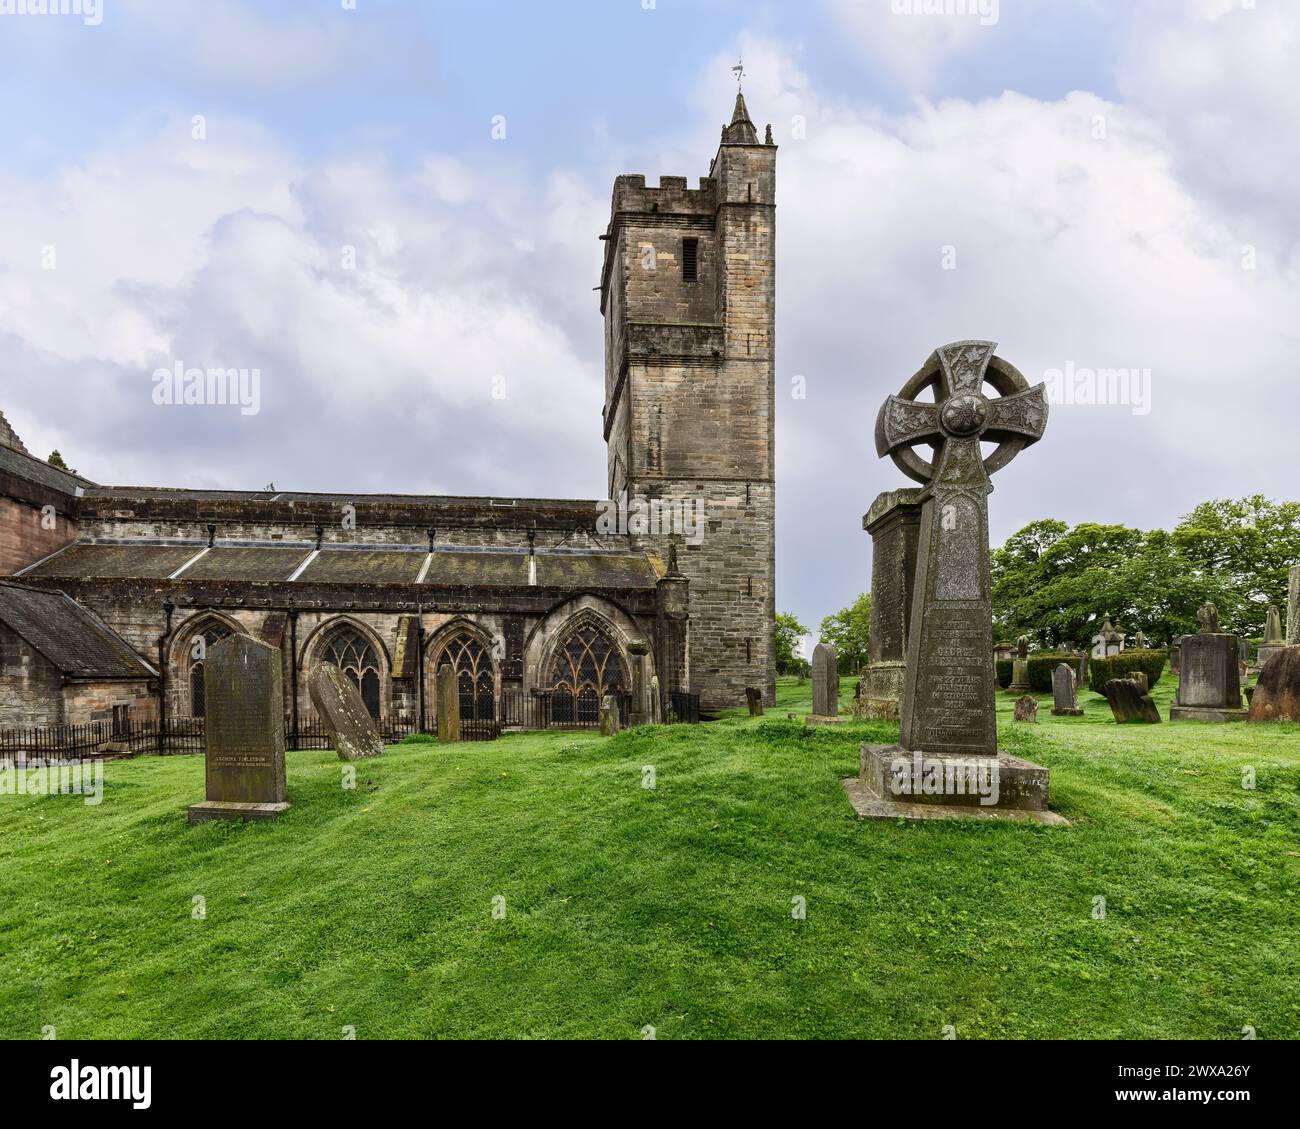 The Church of the Holy Rude stands in solemn grace in Stirling, Scotland, its gothic architecture and Celtic cross tombstones painting a picture of hi Stock Photo